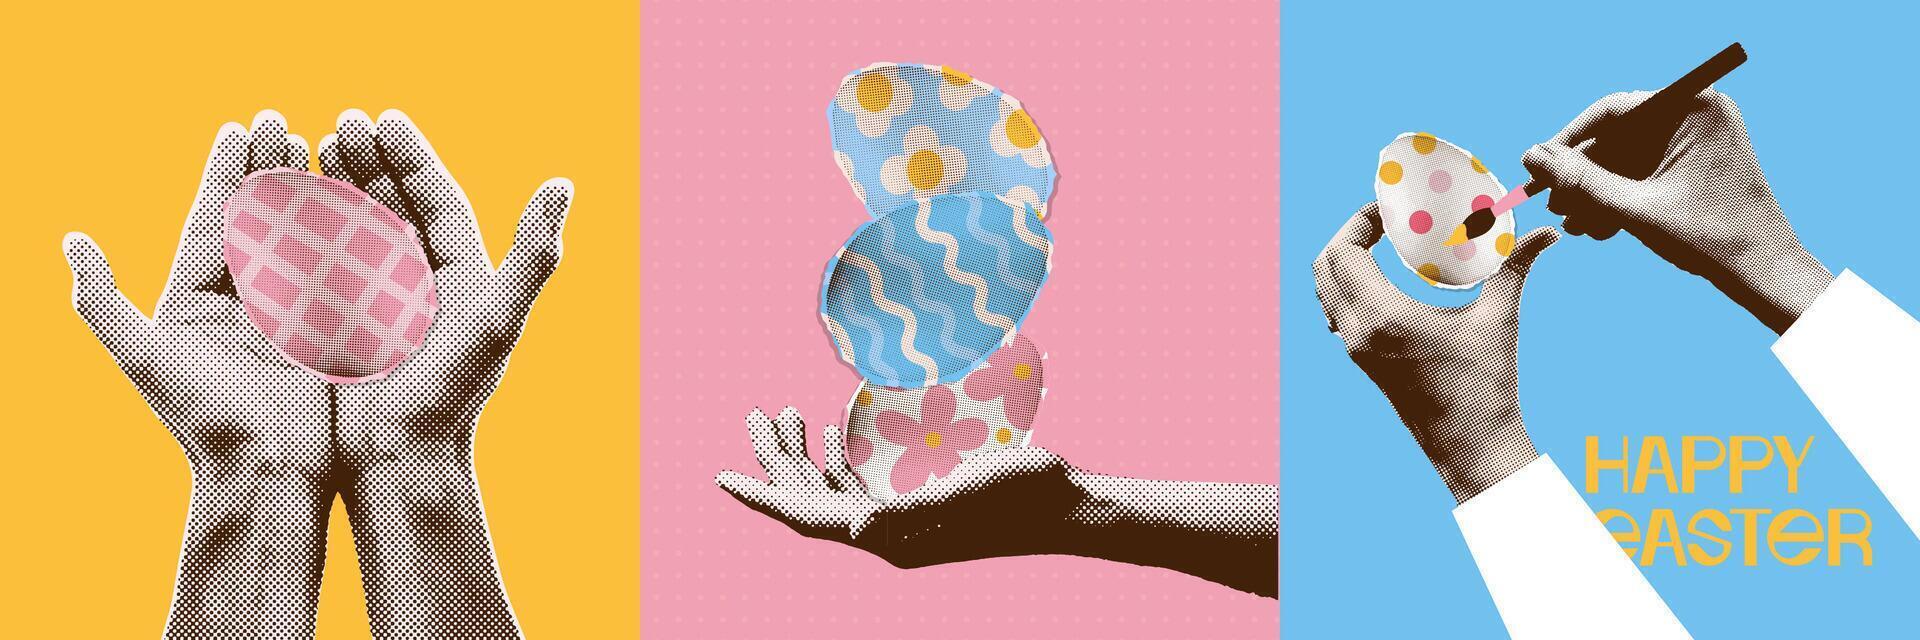 y2k vintage halftone collage of hands holding and painting eggs. The concept of spring holiday celebration . Minimalism cards set. Vector pop art illustration.